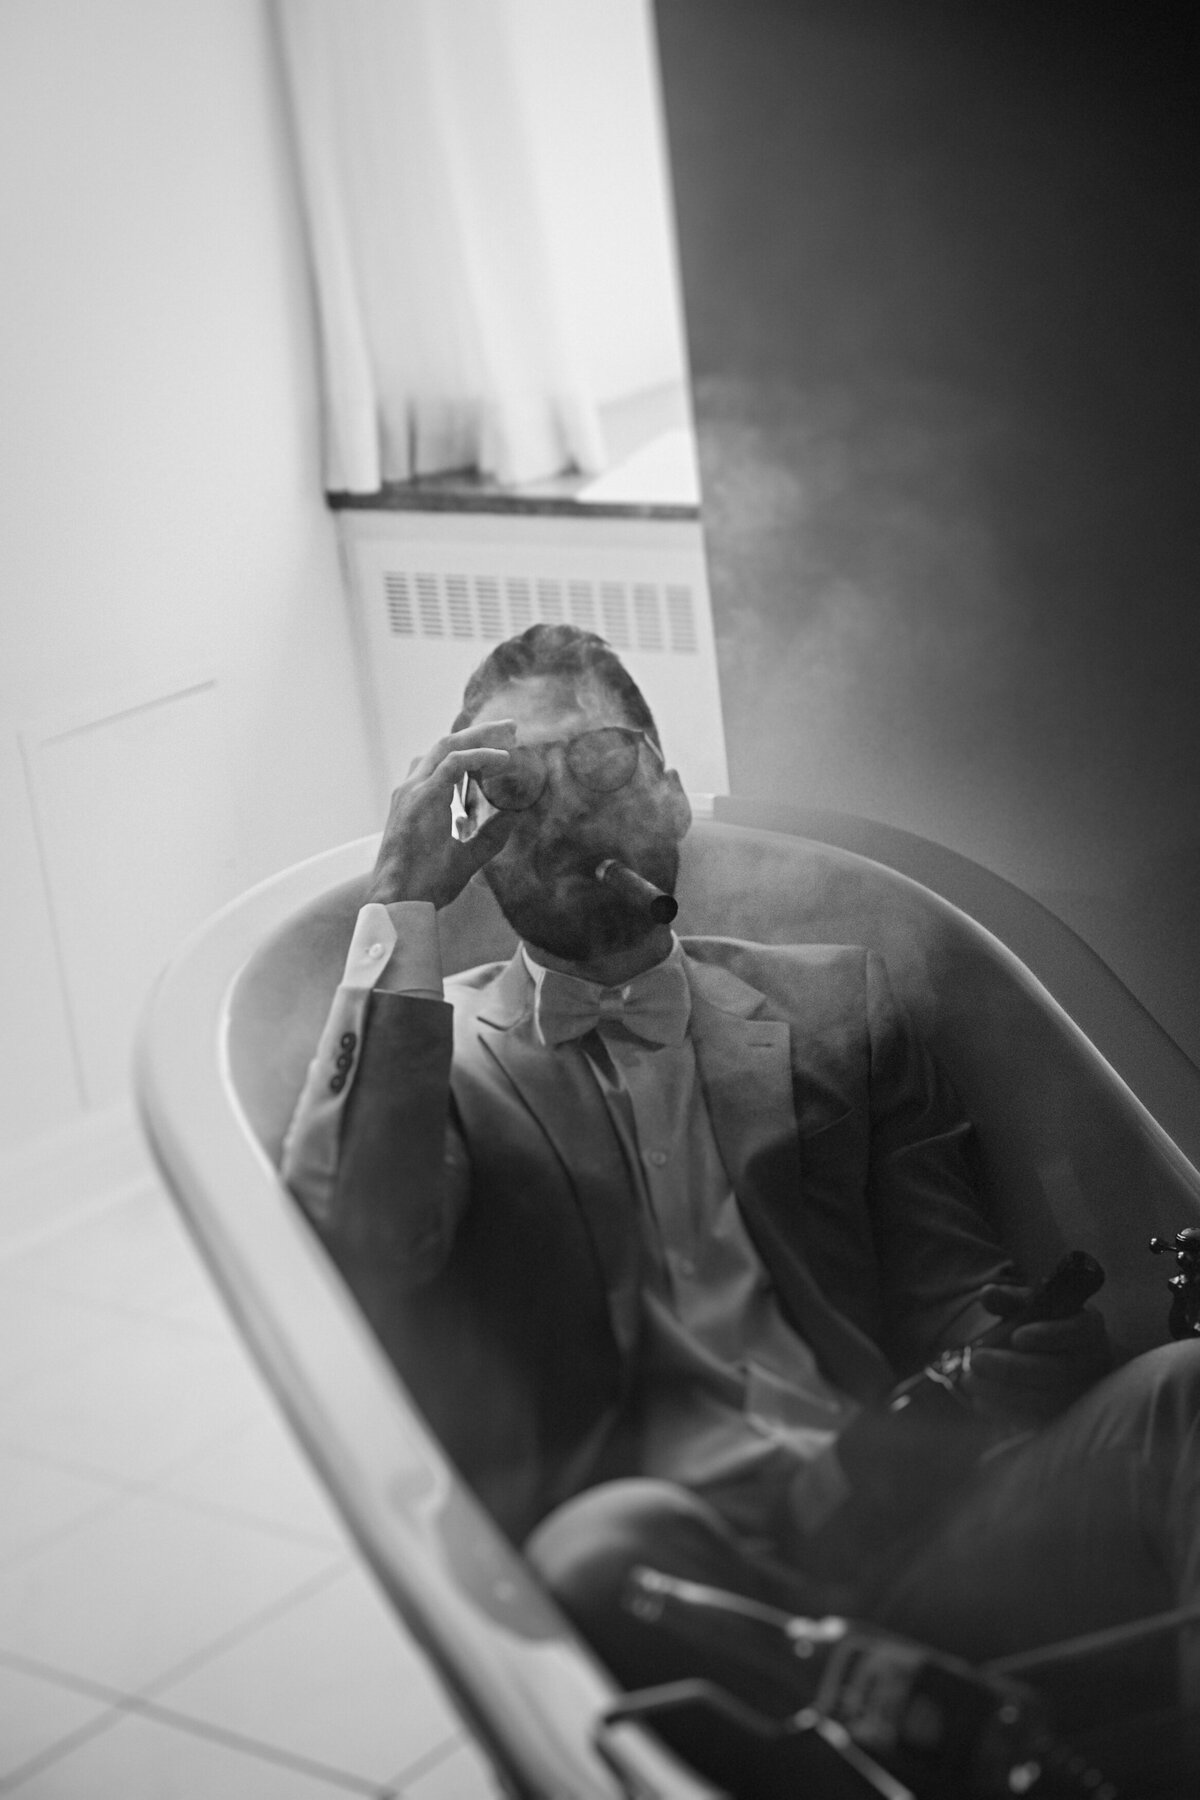 fun-black-and-white-image-of-a-groom-smoking-a-cigar-in-a-tub-1